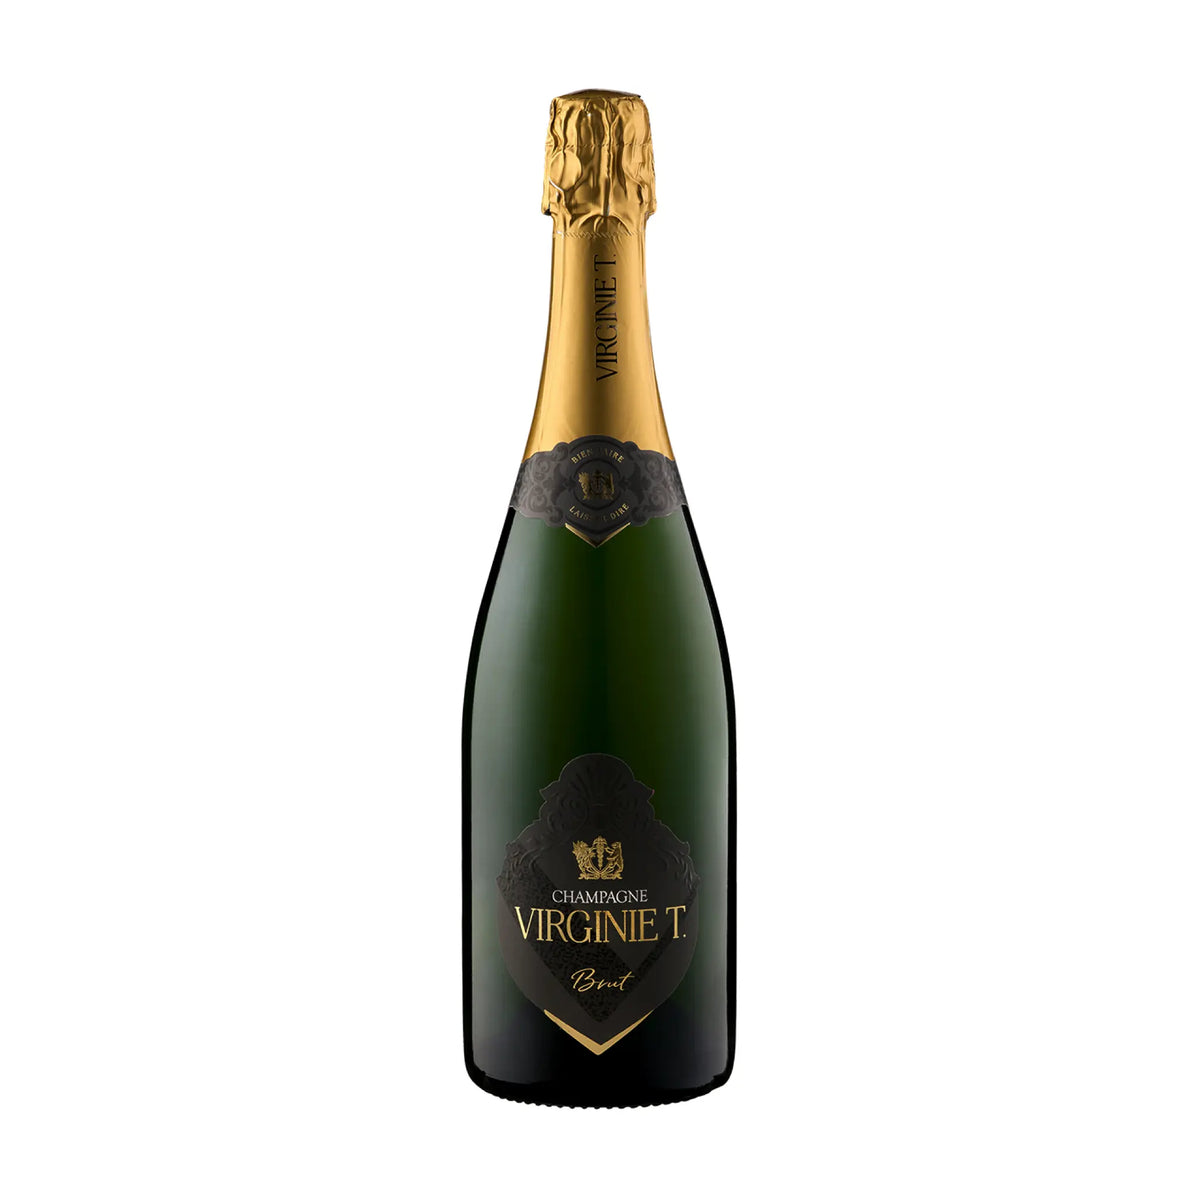 Champagne Virginie T.-Champagner-Champagner-Frankreich-Champagne-Champagne Virginie T. Brut-WINECOM